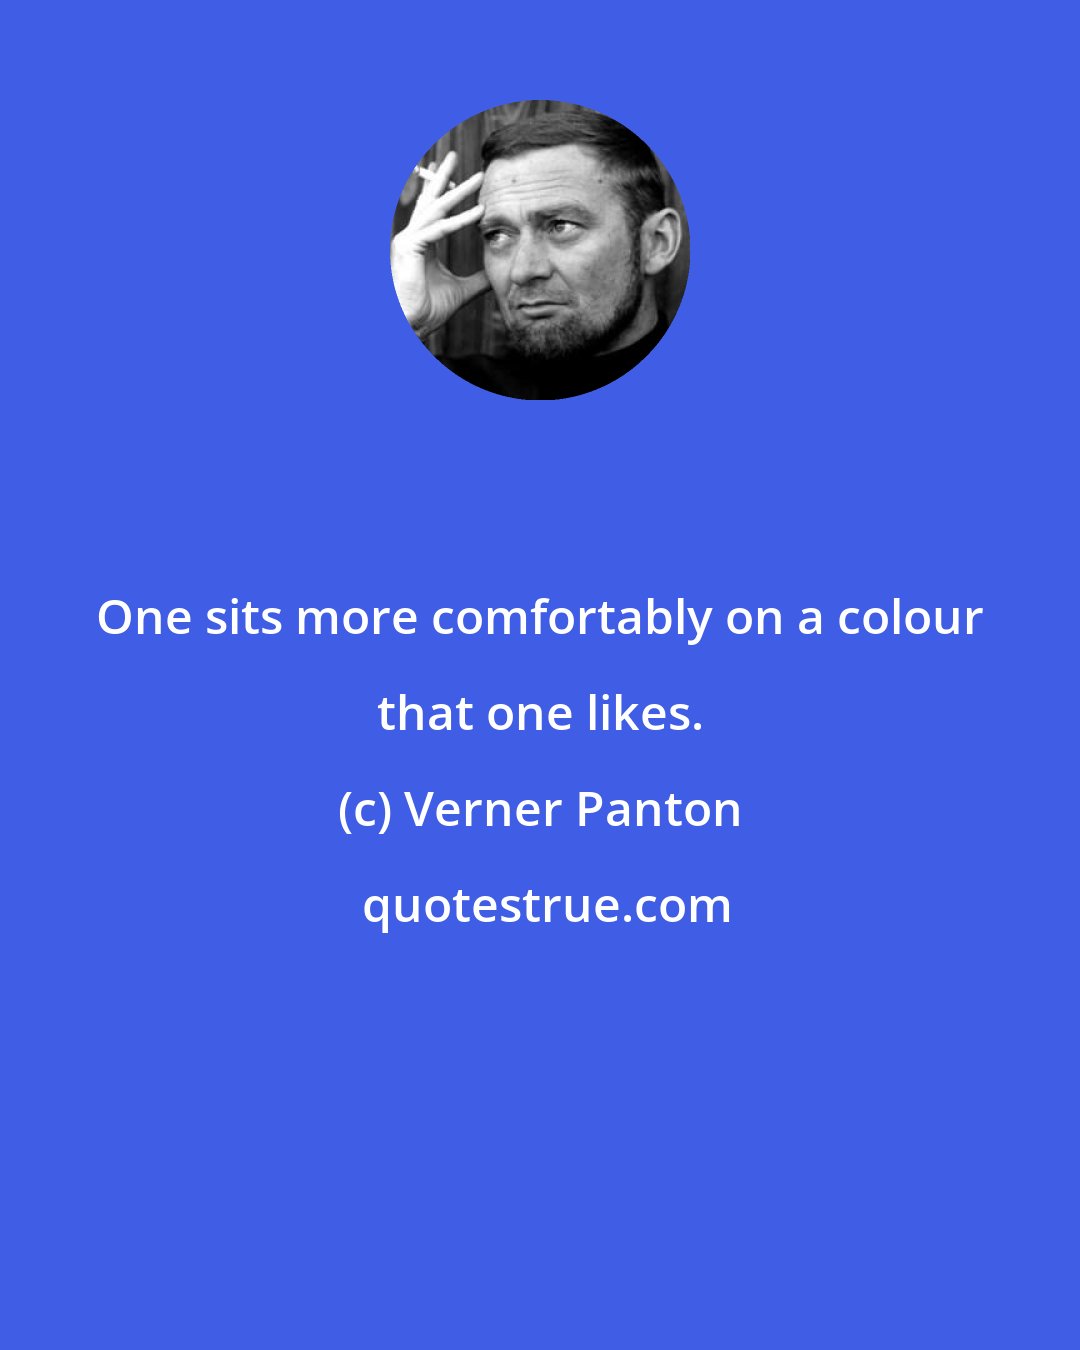 Verner Panton: One sits more comfortably on a colour that one likes.